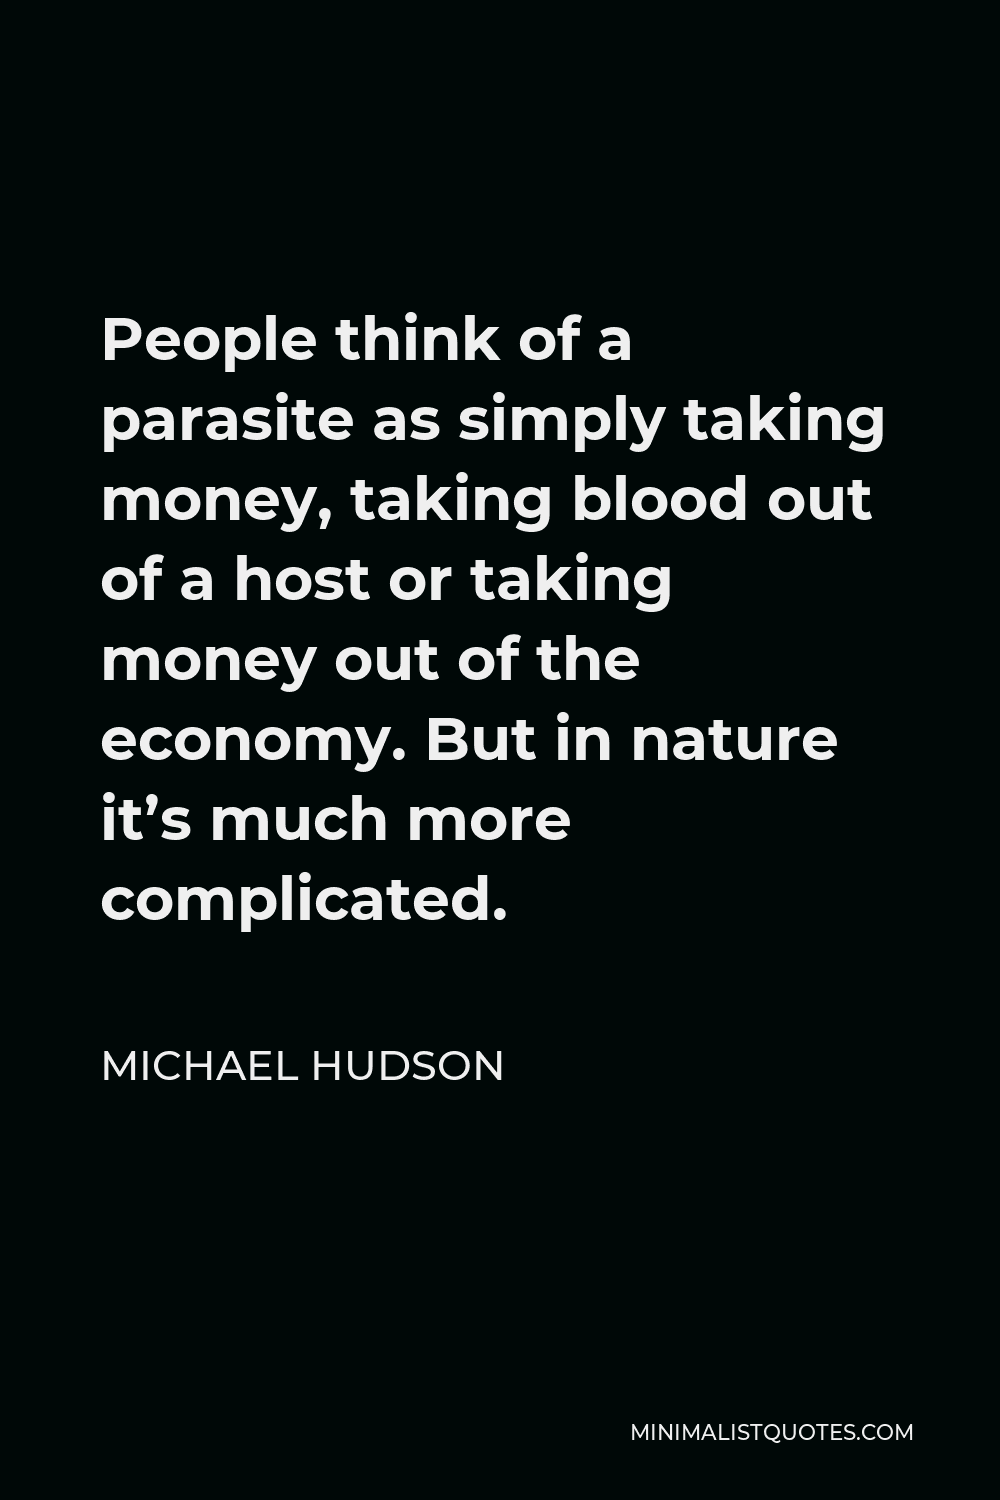 Michael Hudson Quote - People think of a parasite as simply taking money, taking blood out of a host or taking money out of the economy. But in nature it’s much more complicated.